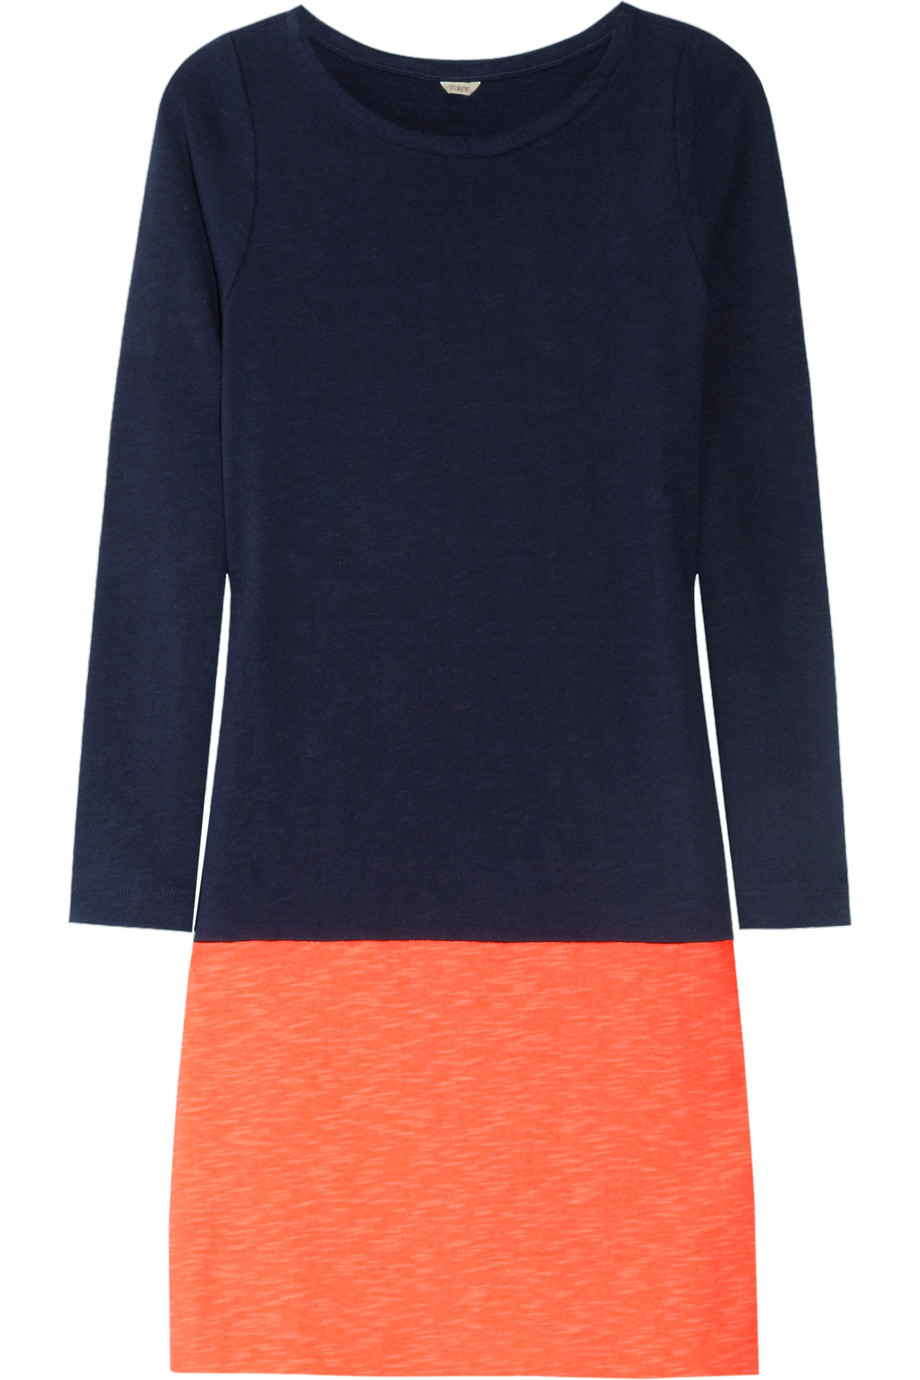 J.crew Maritime Colorblock Cotton Dress in Pink (navy) | Lyst